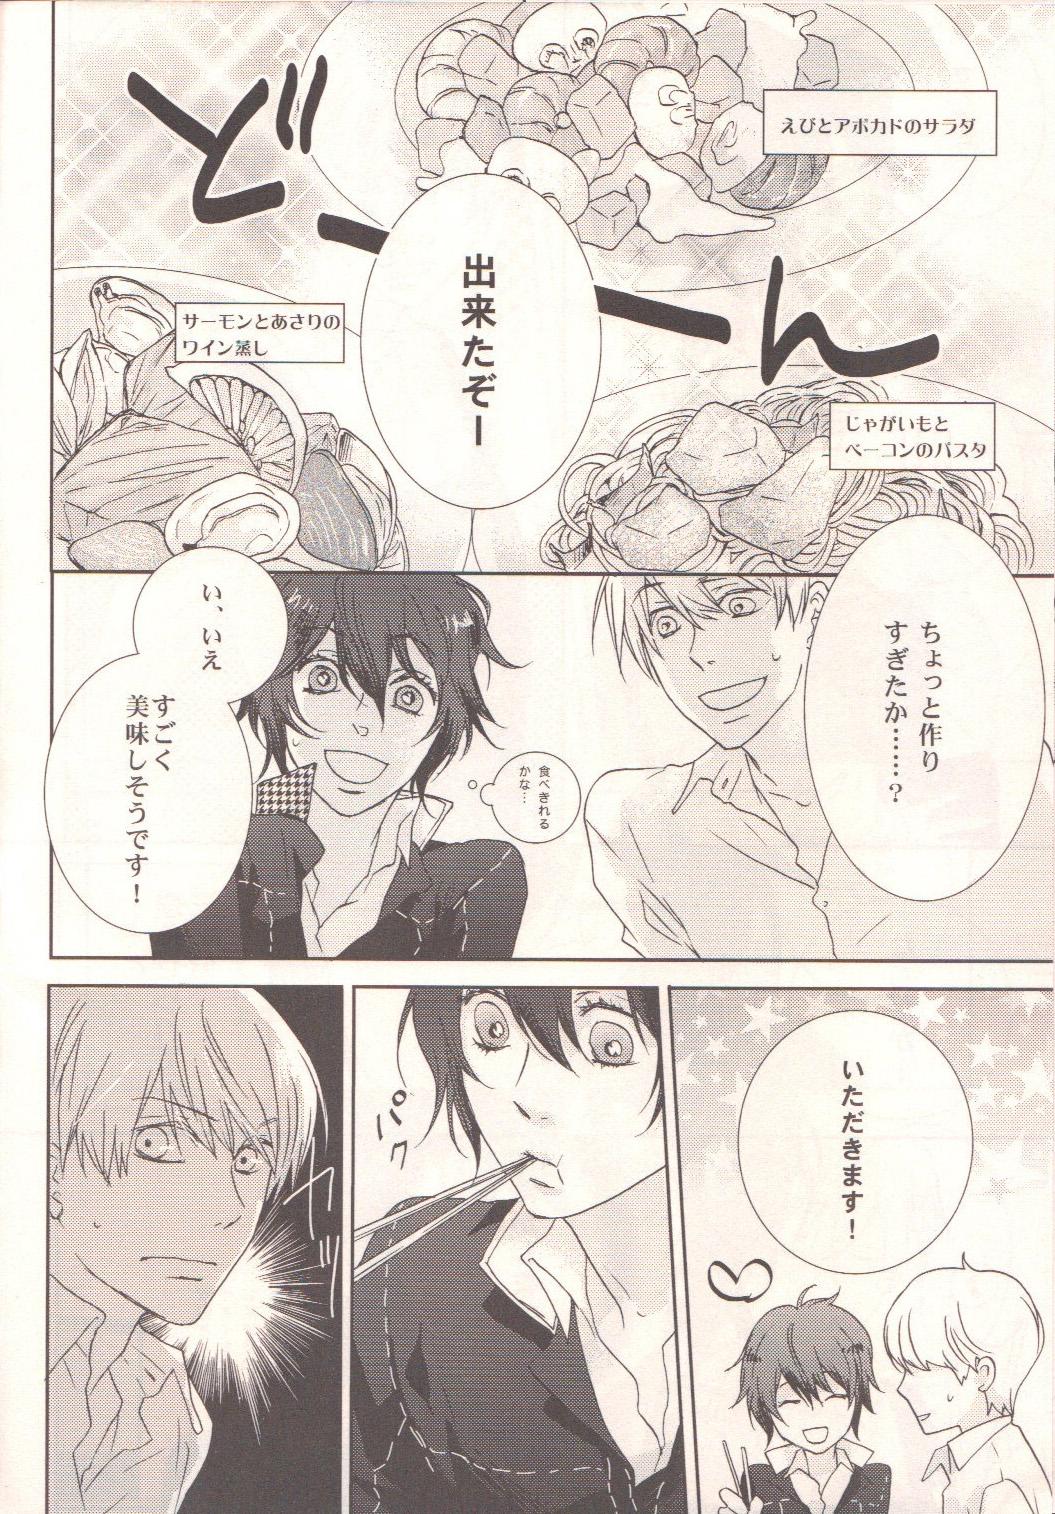 Pack Darling p.p.p.p. - Persona 4 Sex Tape - Page 7